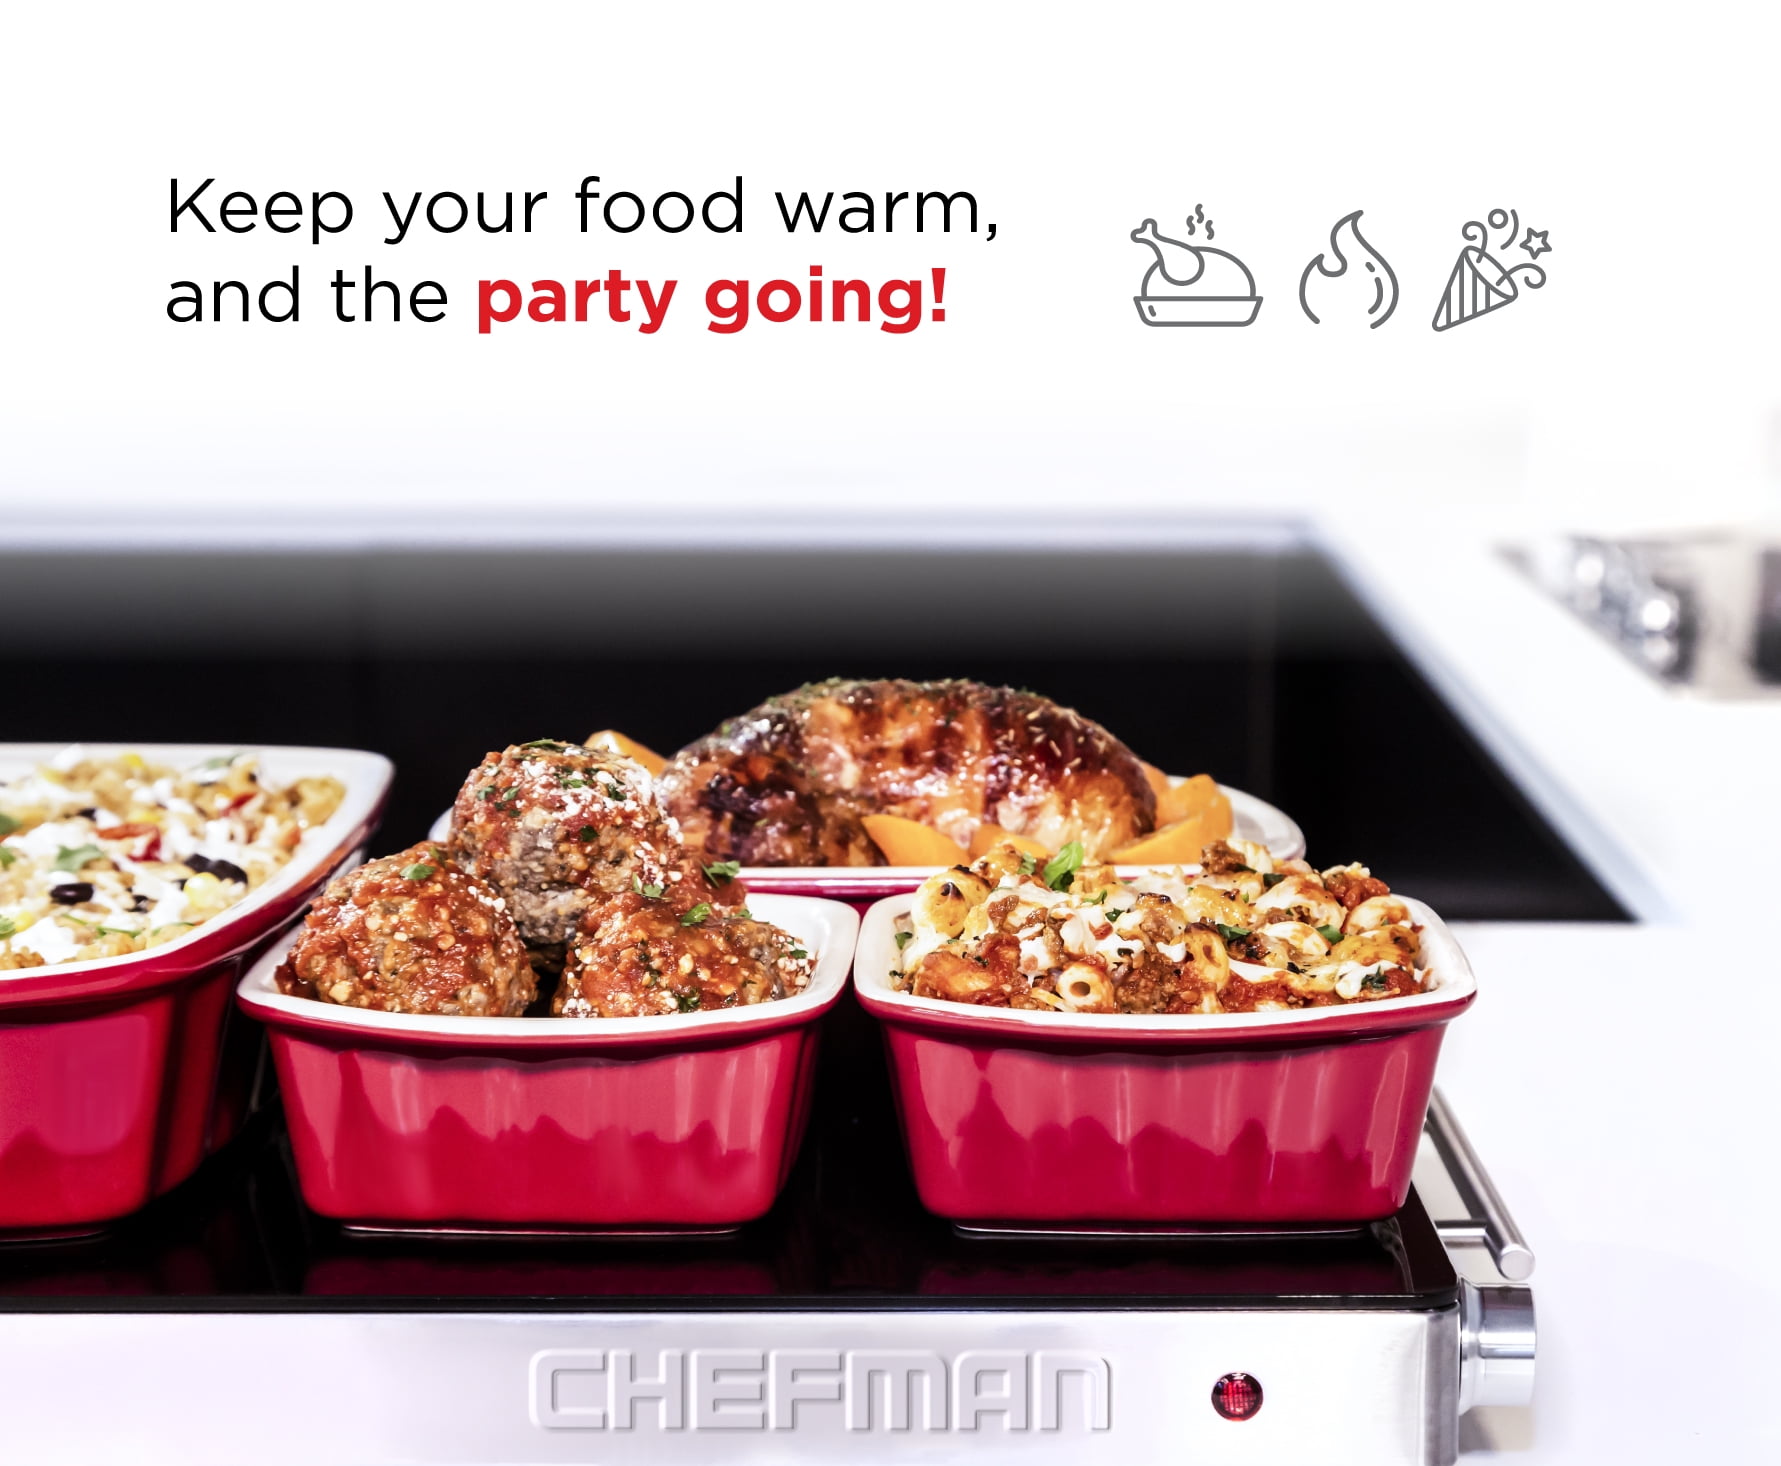 Costco Is Selling Chefman Food Warming Trays for $45